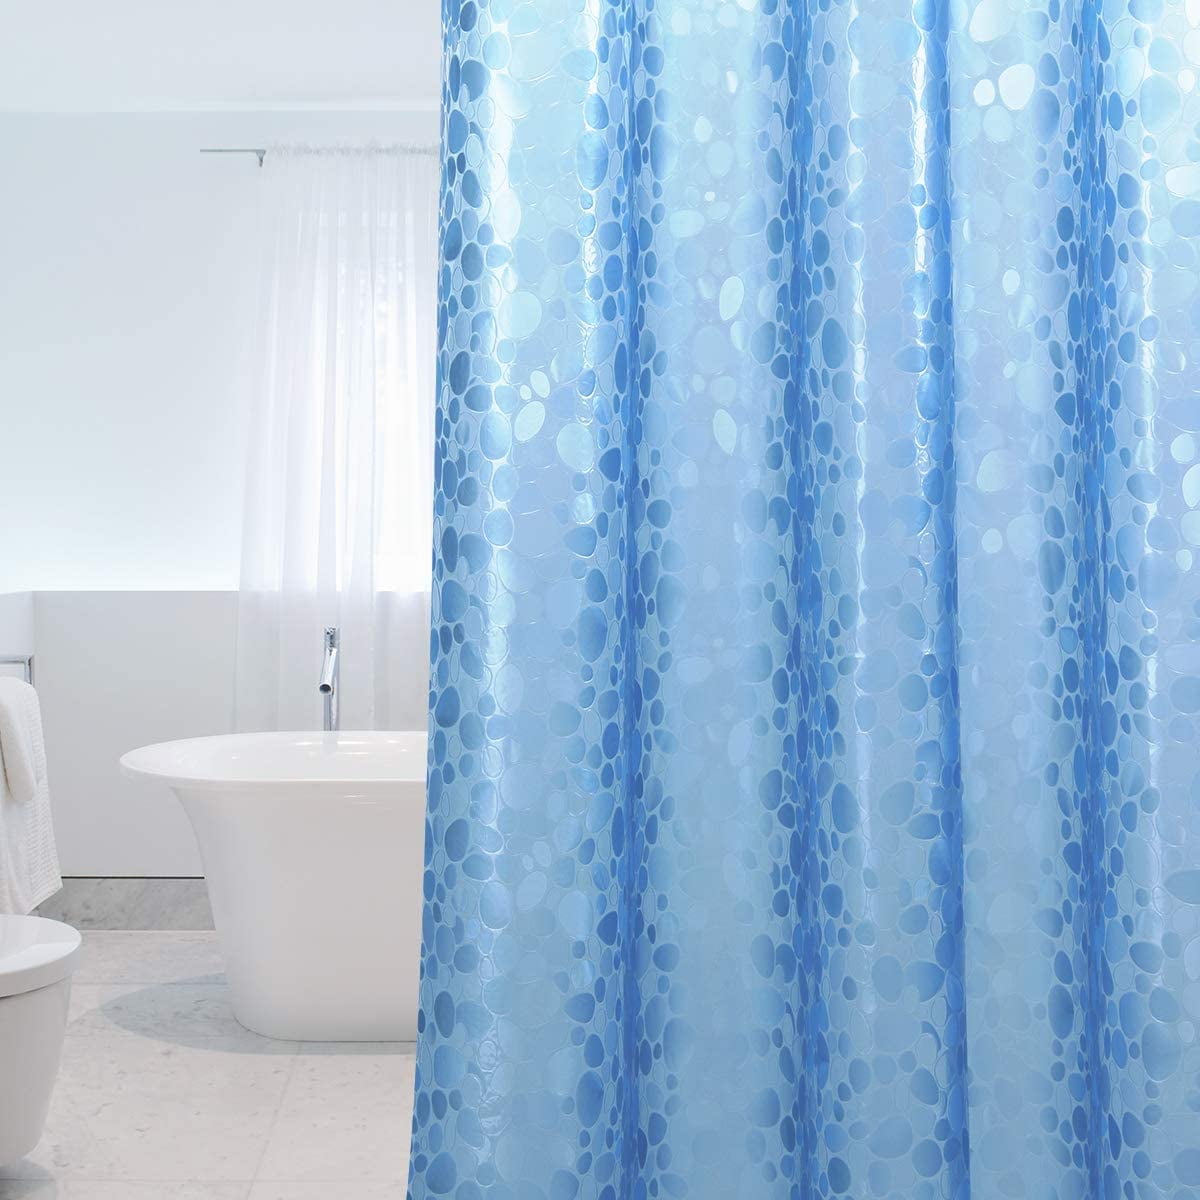 Floral 180 x 180 cm WELTRXE Polyester Shower Curtain Decorative Bathroom Curtains Waterproof Mold-proof Anti-Bacterial Bath Curtain with 12 Hooks